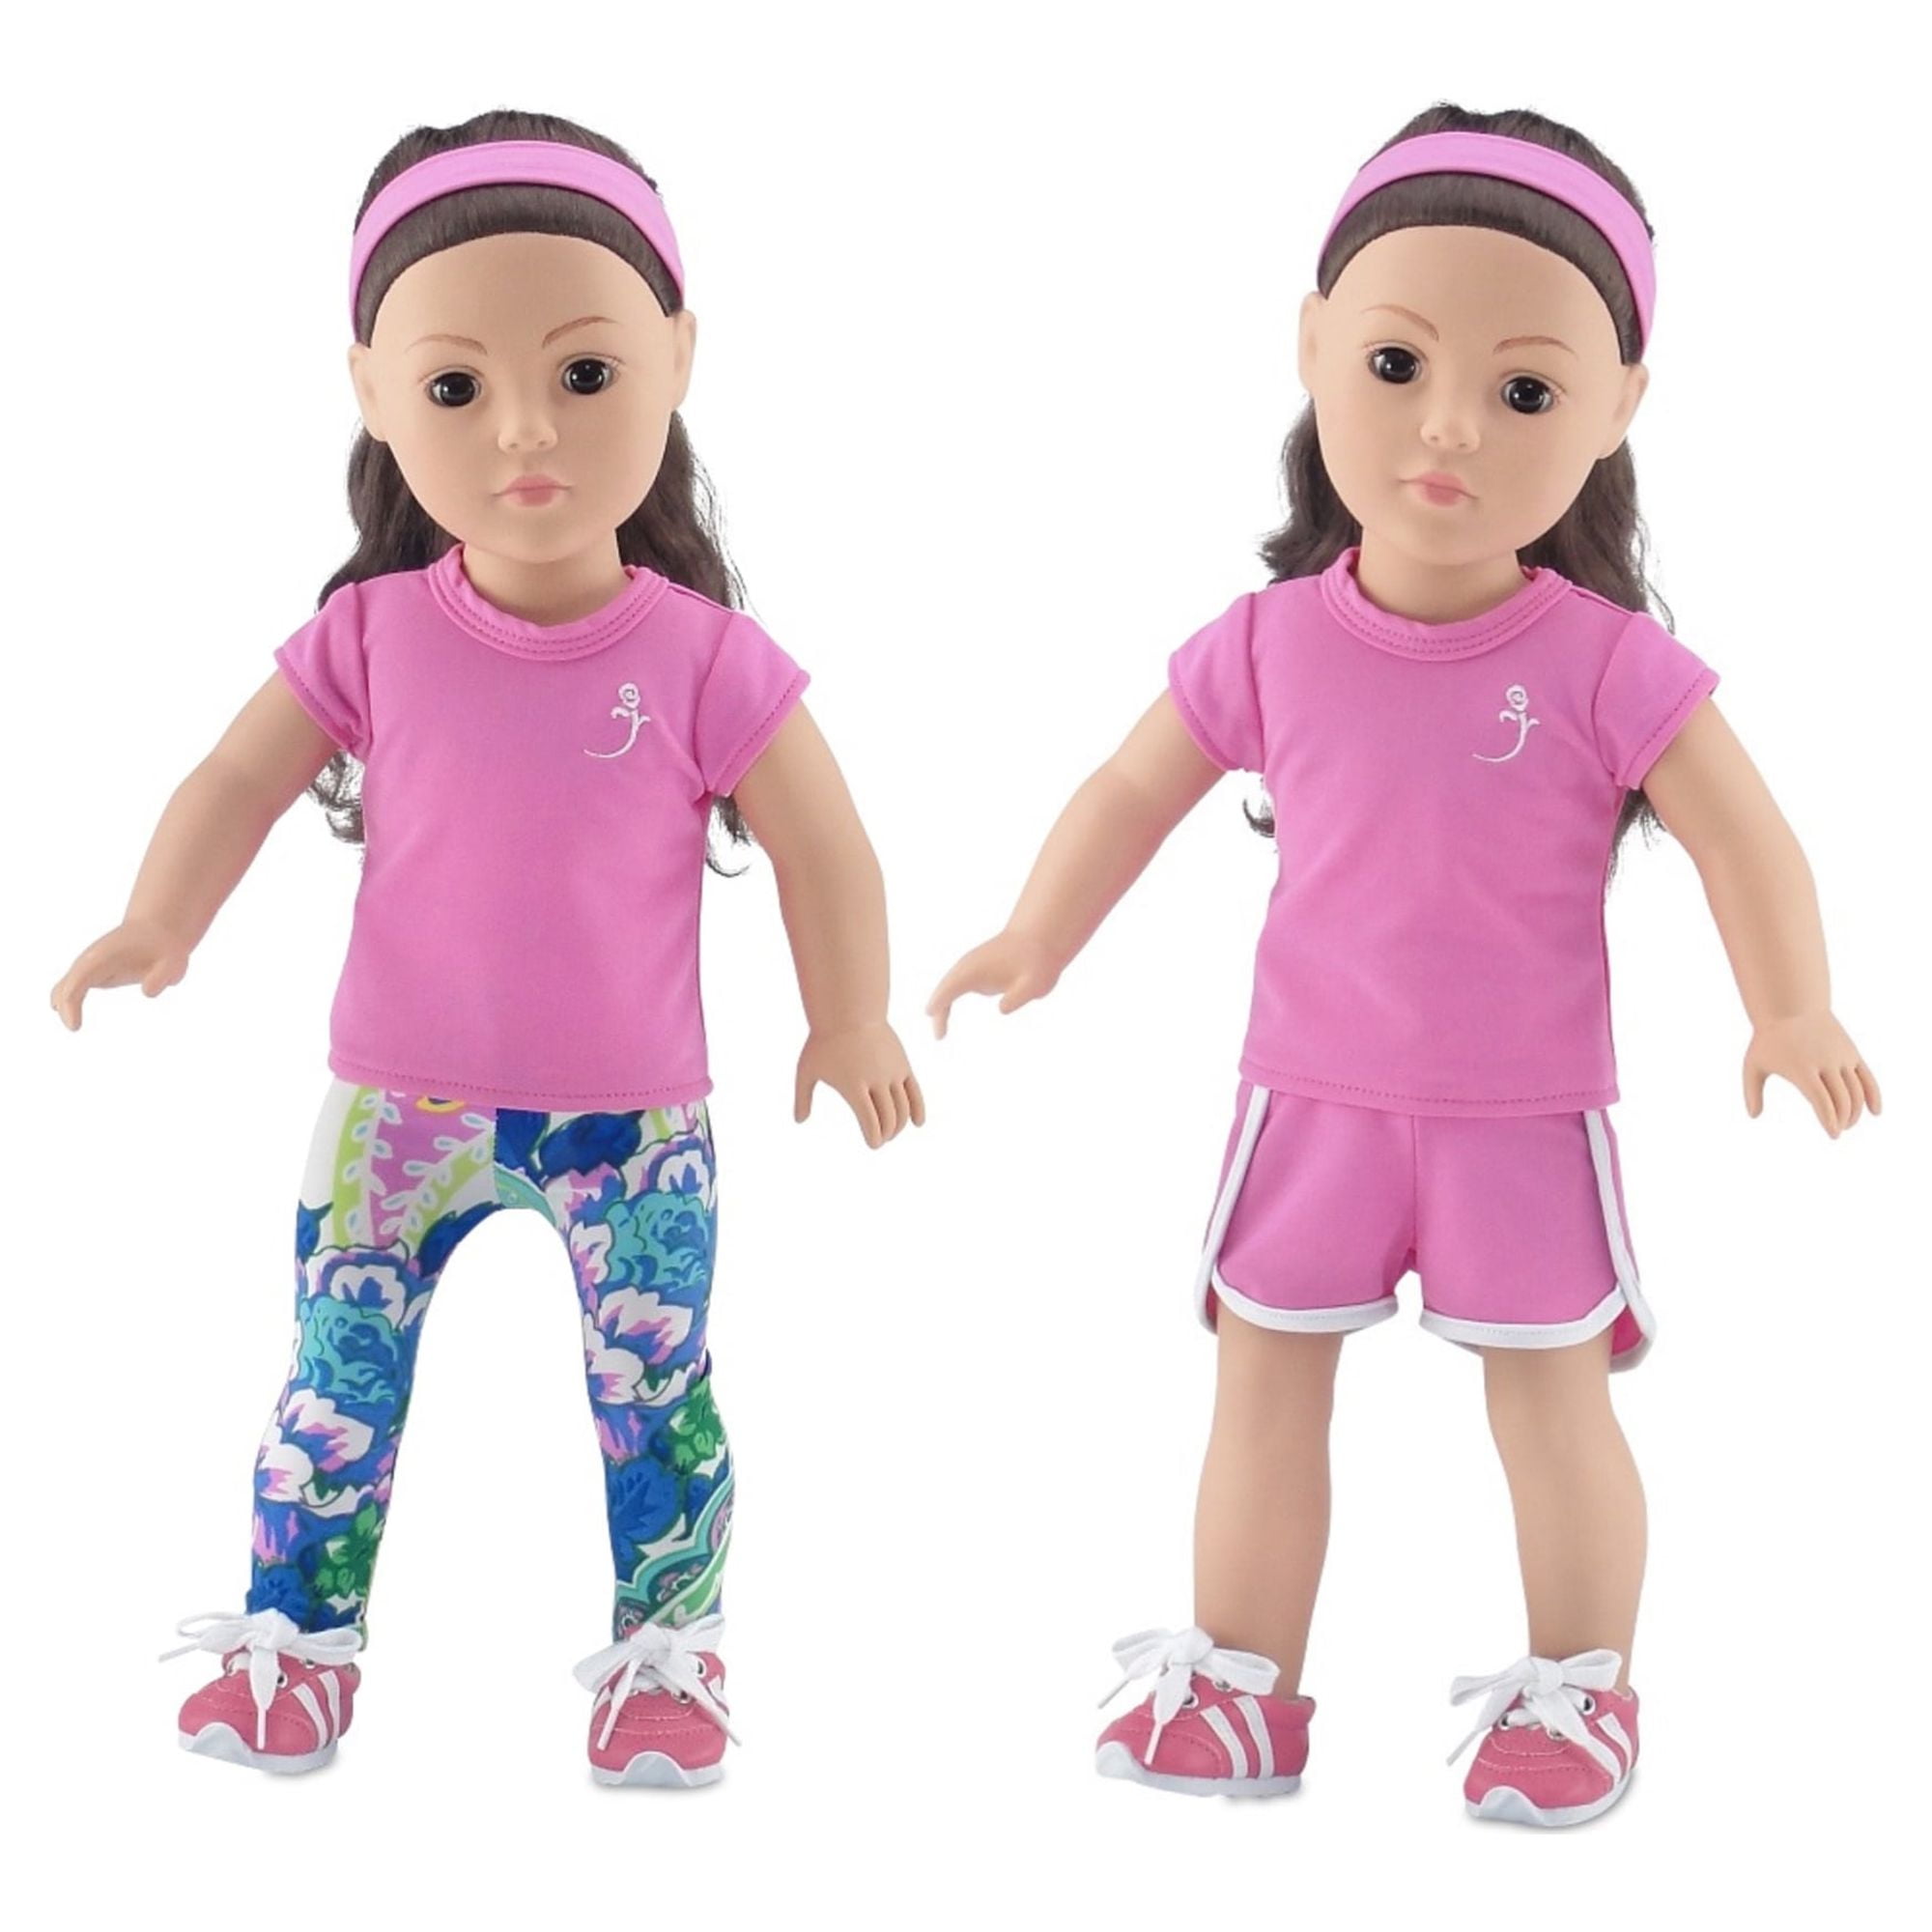 ZITA ELEMENT American 18 Inch Girl Doll Yoga Clothes and Accessories for 18  Inch Dolls Sport Set - 18 Inch Doll Yoga Clothing Outfits with Shoes  Portable Sports Bag Yoga Bands Towel